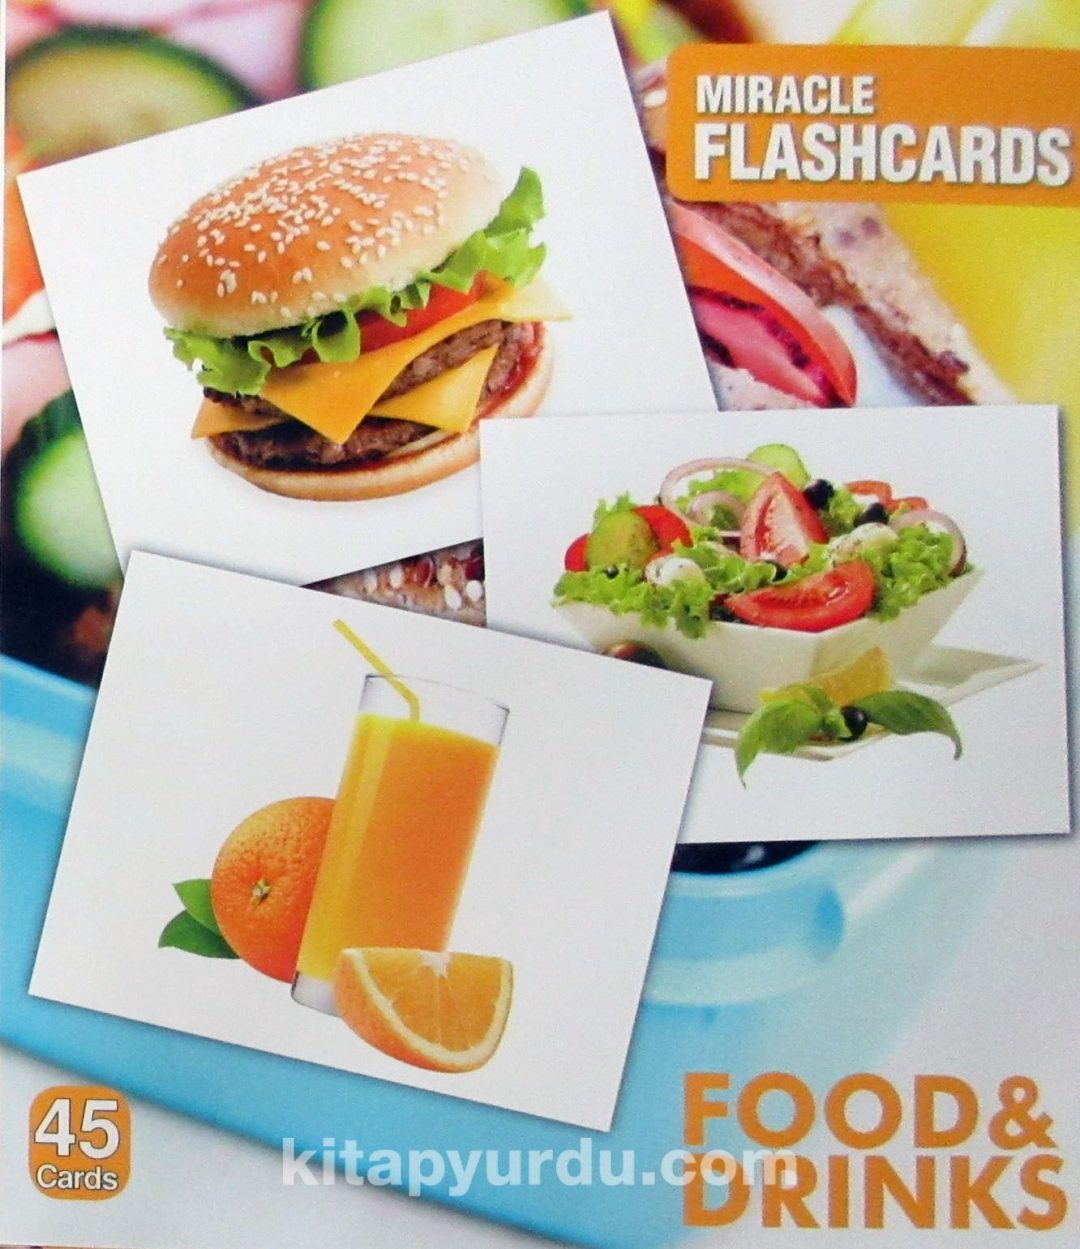 Food-Drink Miracle Flashcards (45 Cards)